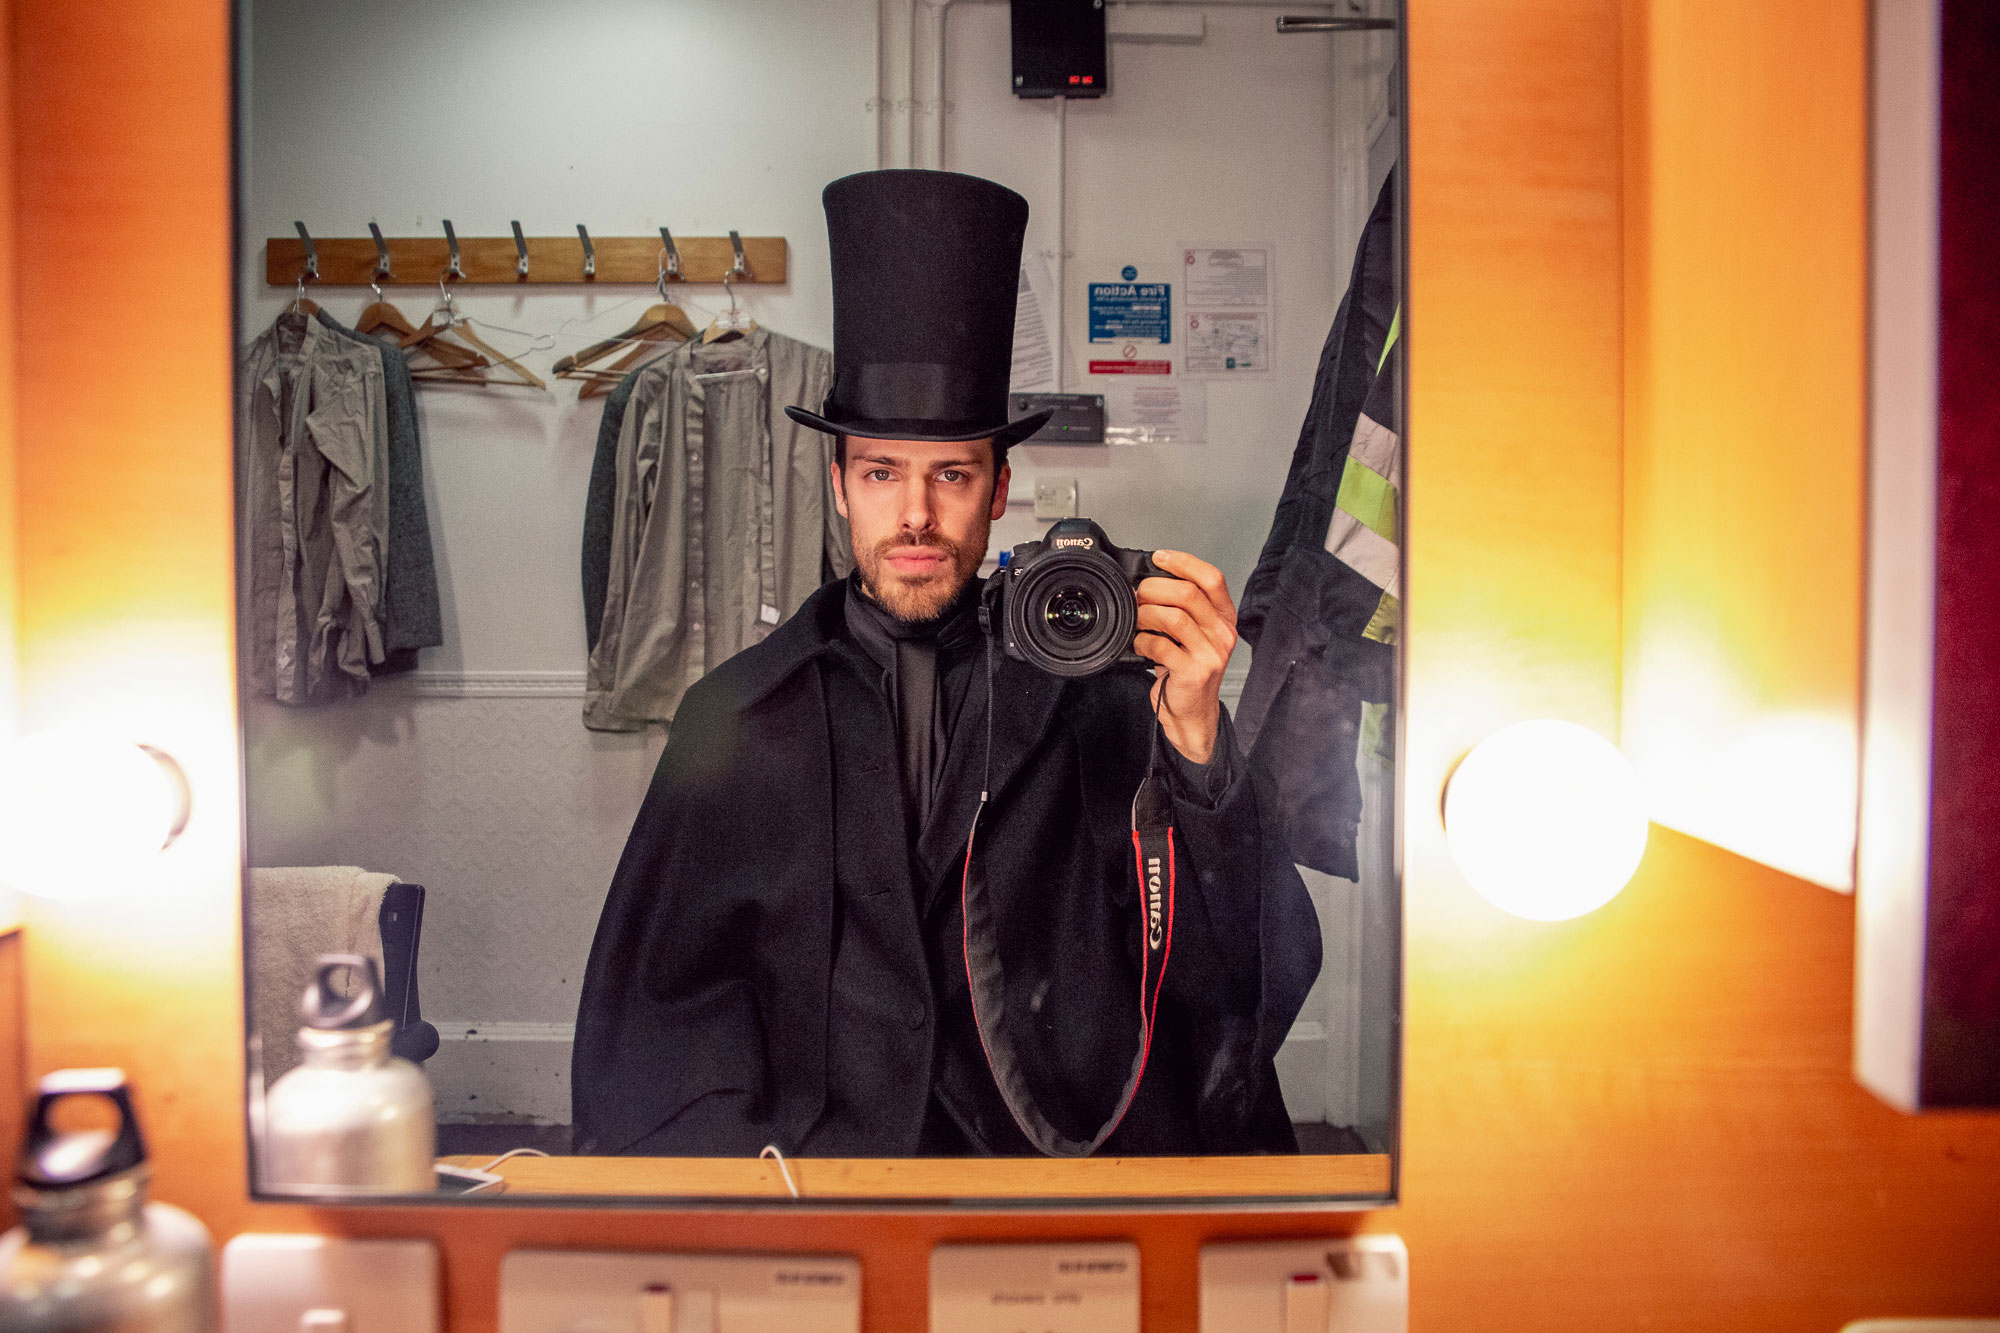 man taking a picture in the mirror: wearing a full suit and top hat